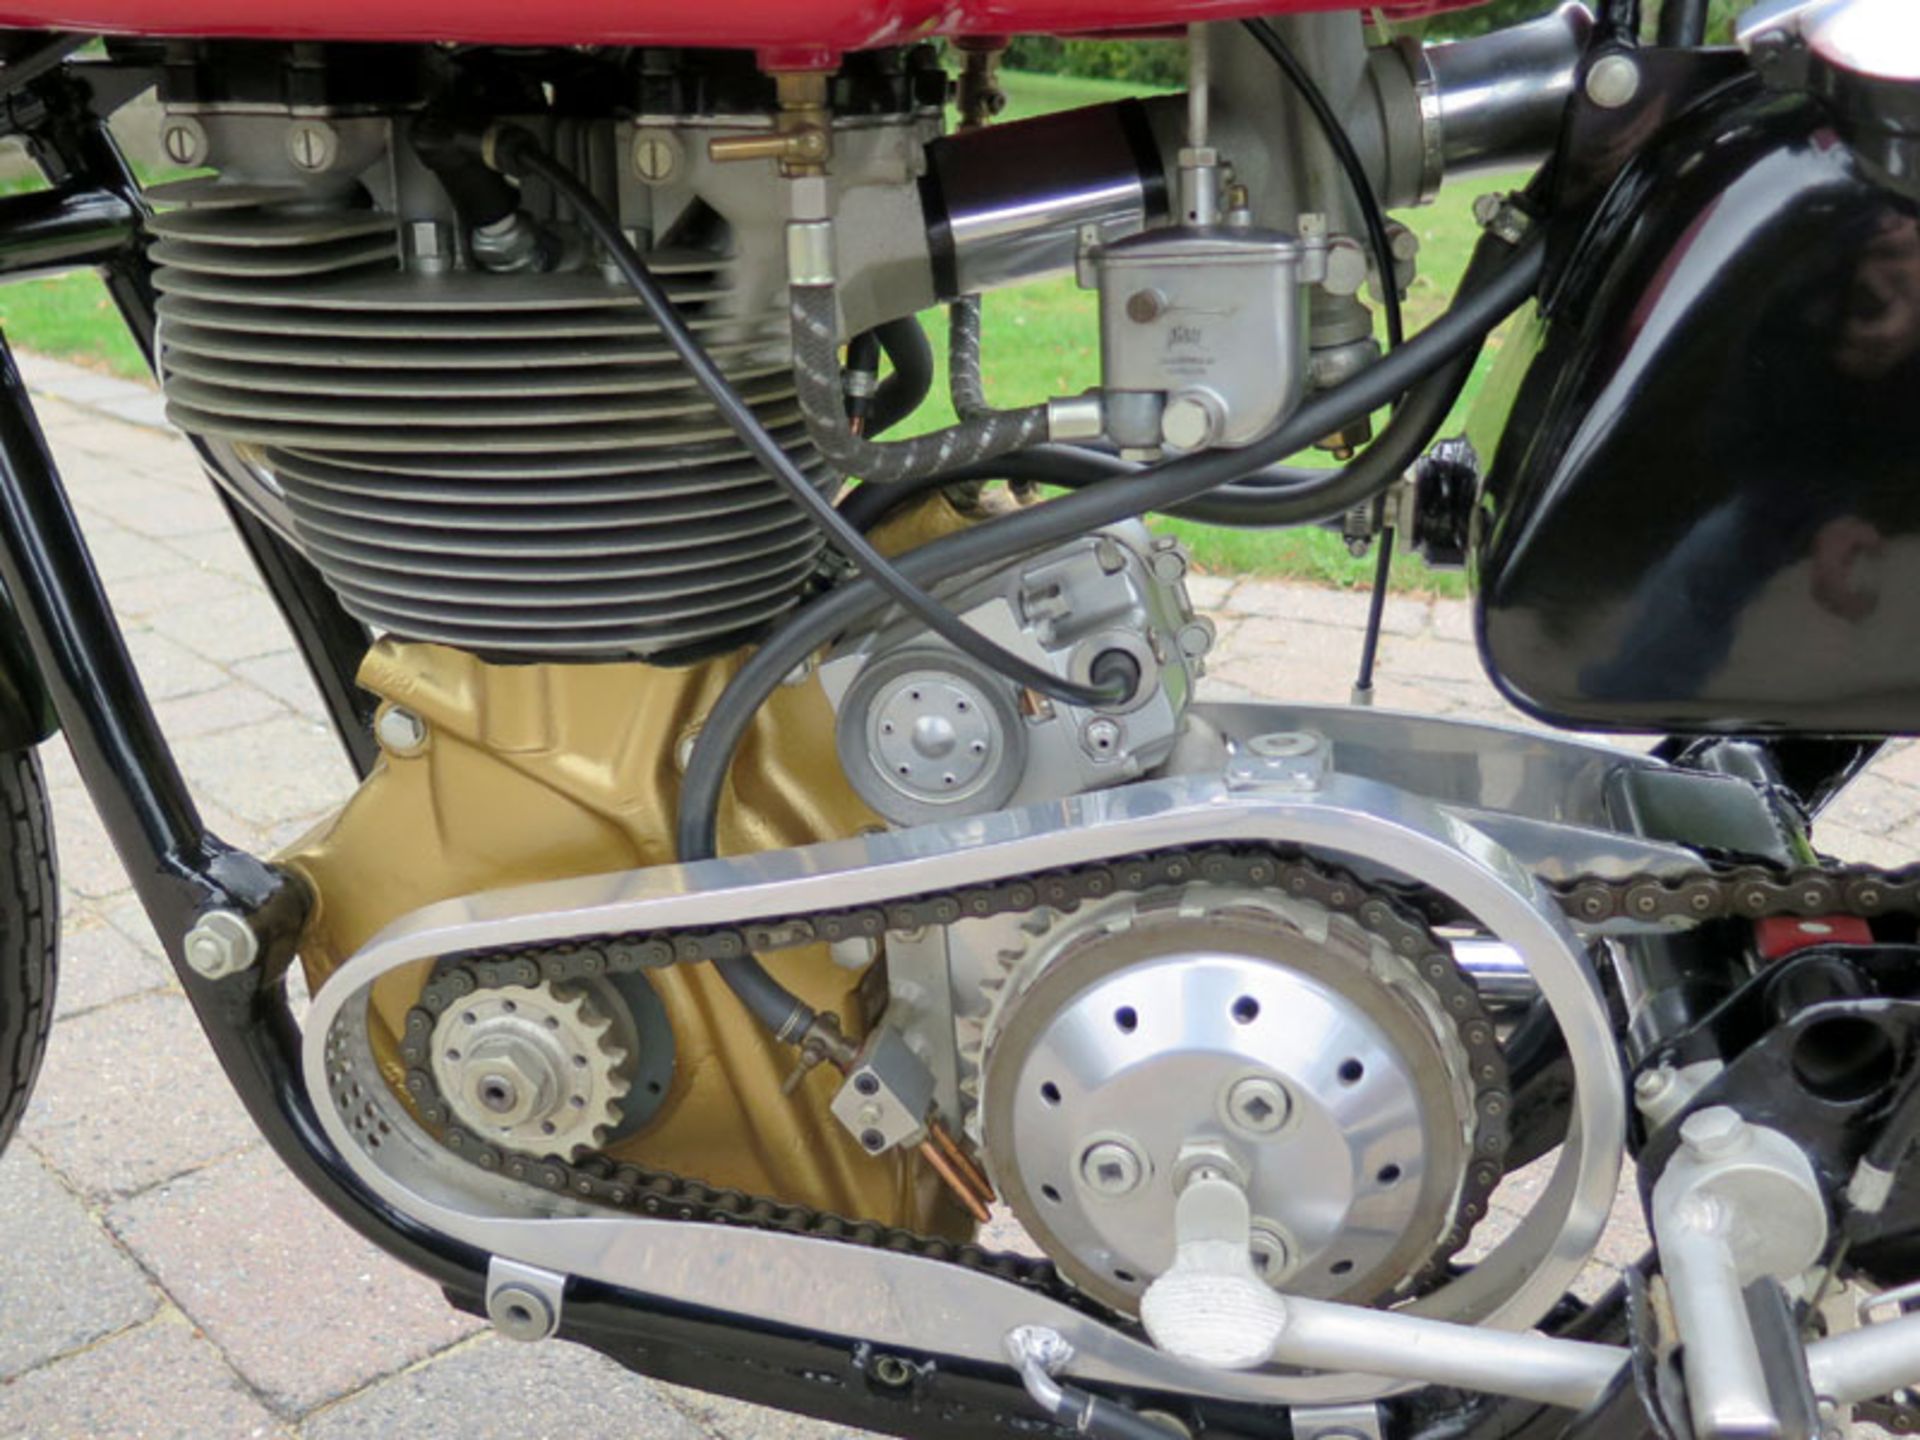 1962 Matchless G50 - Image 4 of 6